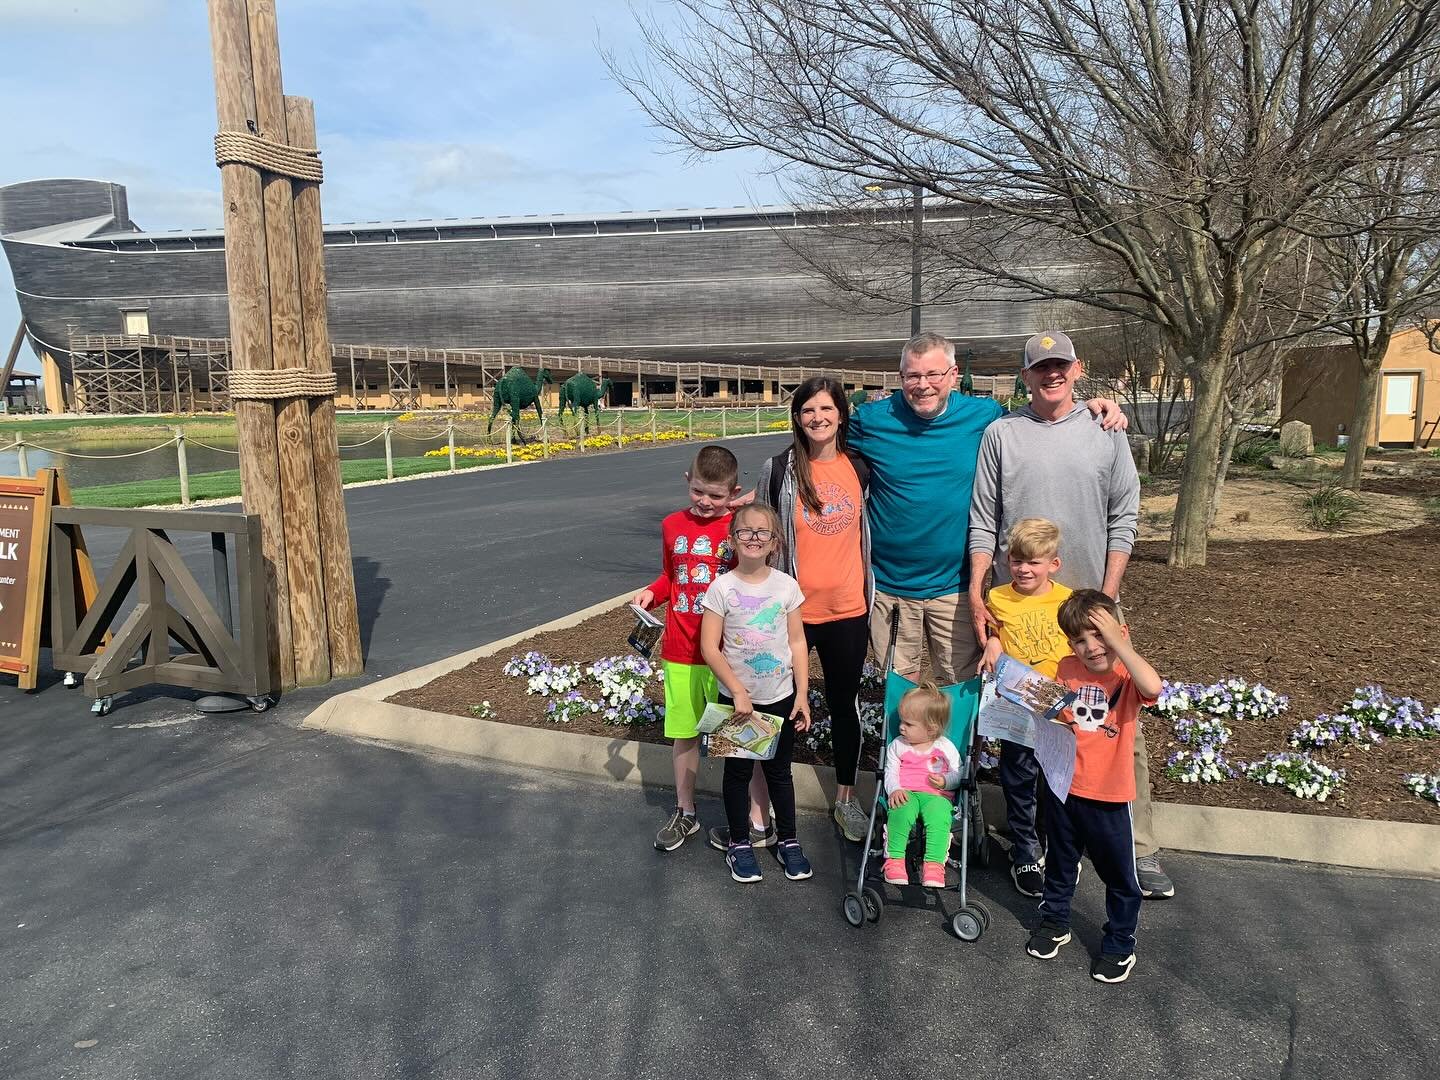 Here&rsquo;s the vacation top 10 from this week!! We had a blast every day! We learned a lot, and explored a ton of new places! #raisingtherivenbarks @arkencounter @cincinnatizoo @creationmuseum @newport_aquarium